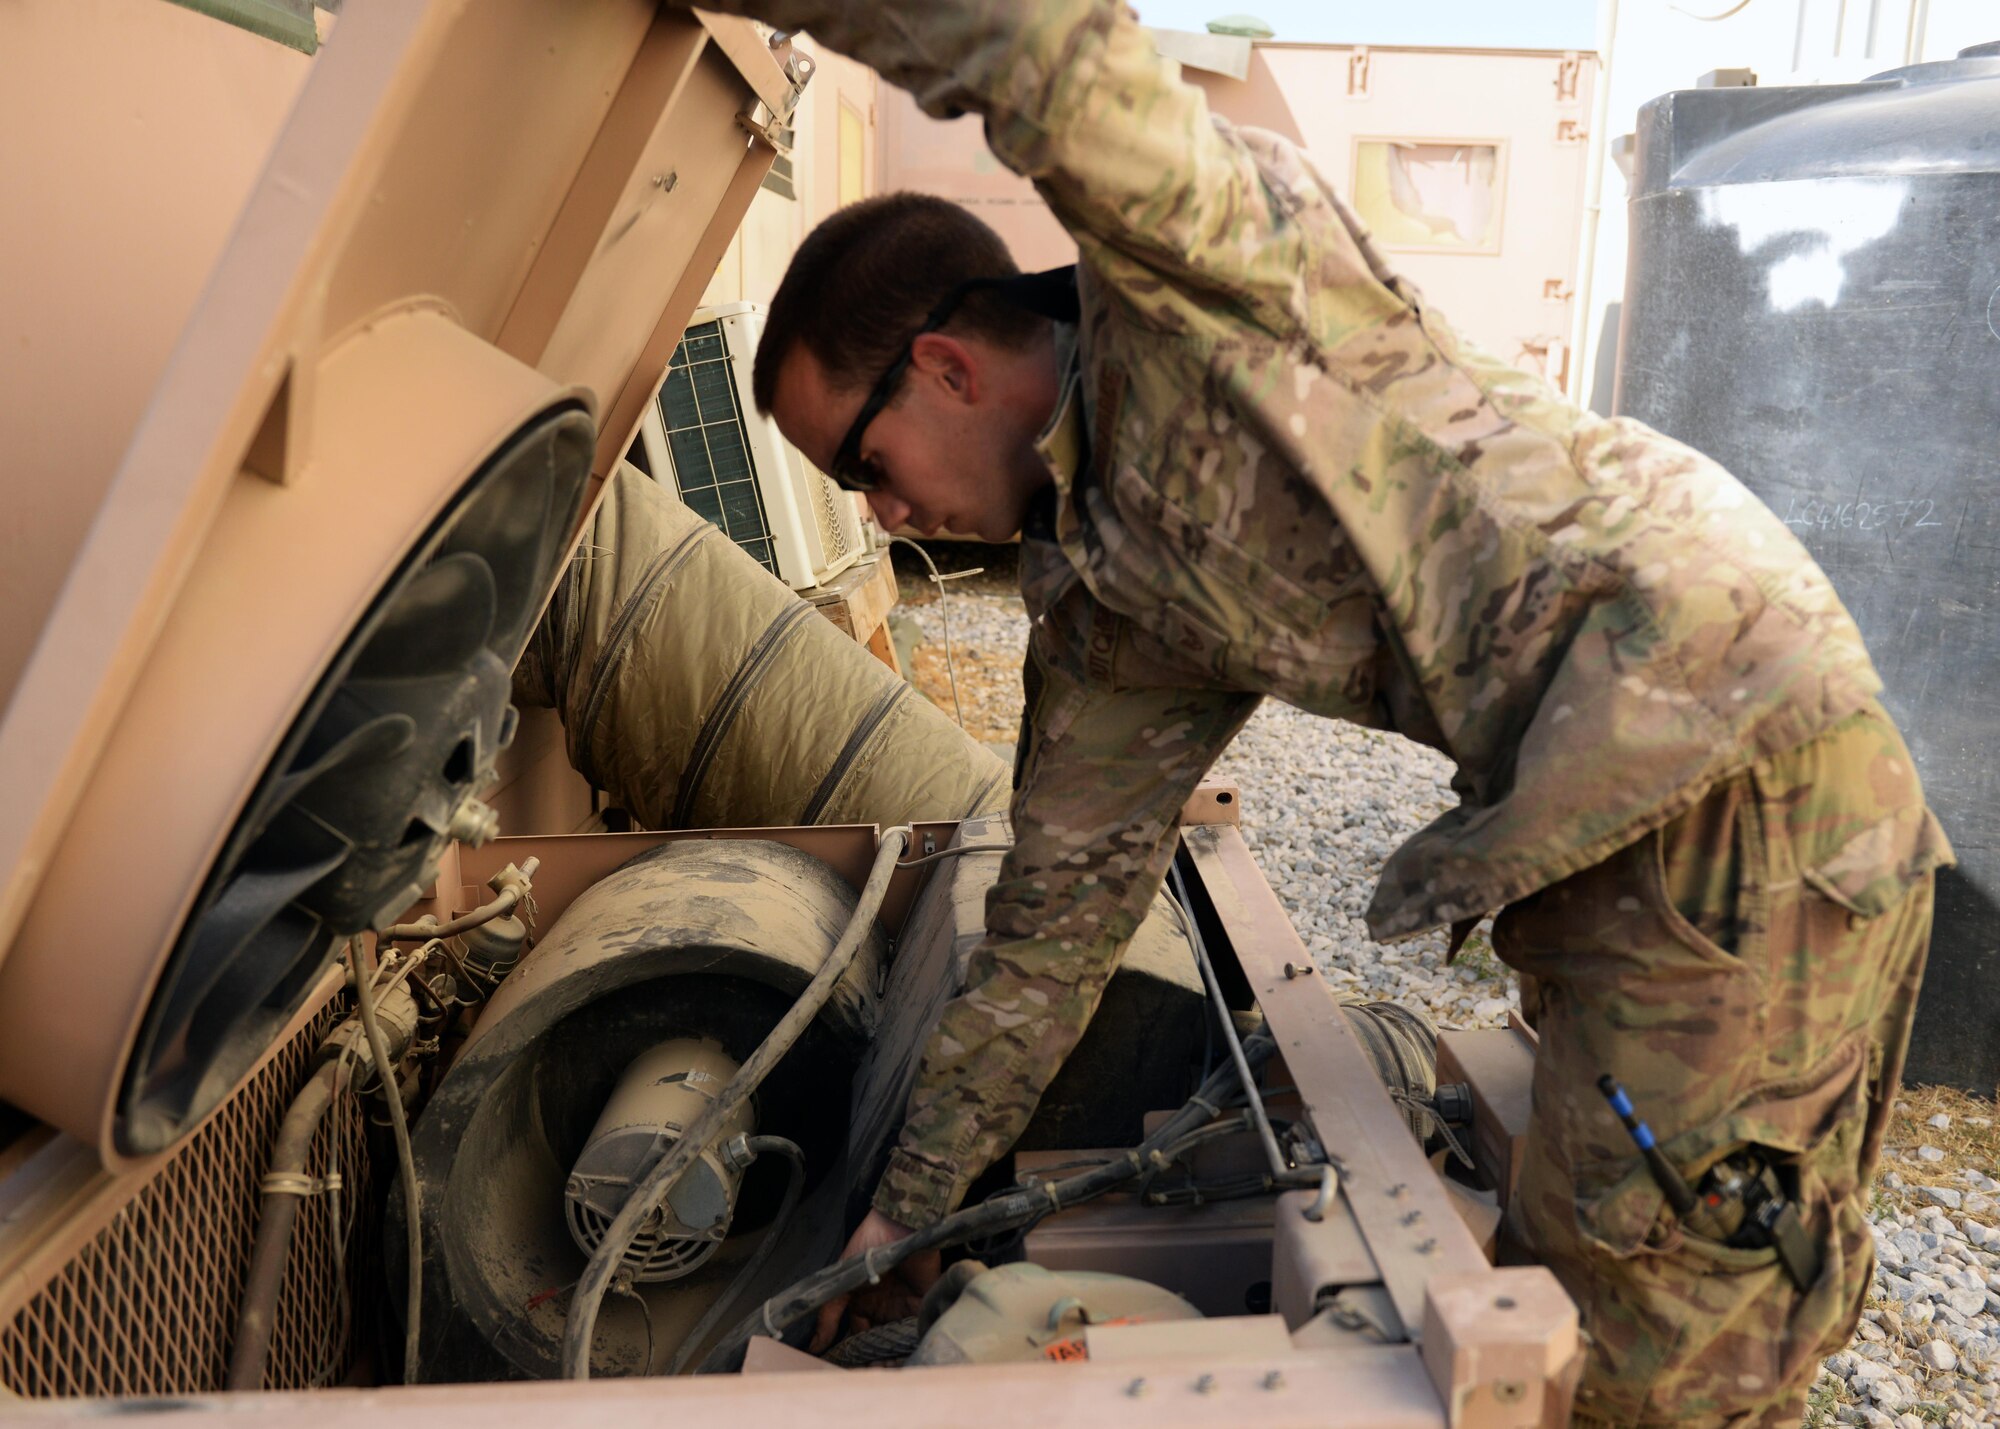 U.S. Air Force Staff Sgt. Russell Dutcher, 455th Expeditionary Civil Engineer Squadron HVAC technician, repairs an air conditioning unit June 30, 2015, at Bagram Airfield, Afghanistan. Dutcher, who is part of the 1000s of Hands project, is responsible for responding to all work orders dealing with AC problems as well as keeping Bagram’s mission equipment such as computers and servers cool. (U.S. Air Force photo By Senior Airman Cierra Presentado/Released)